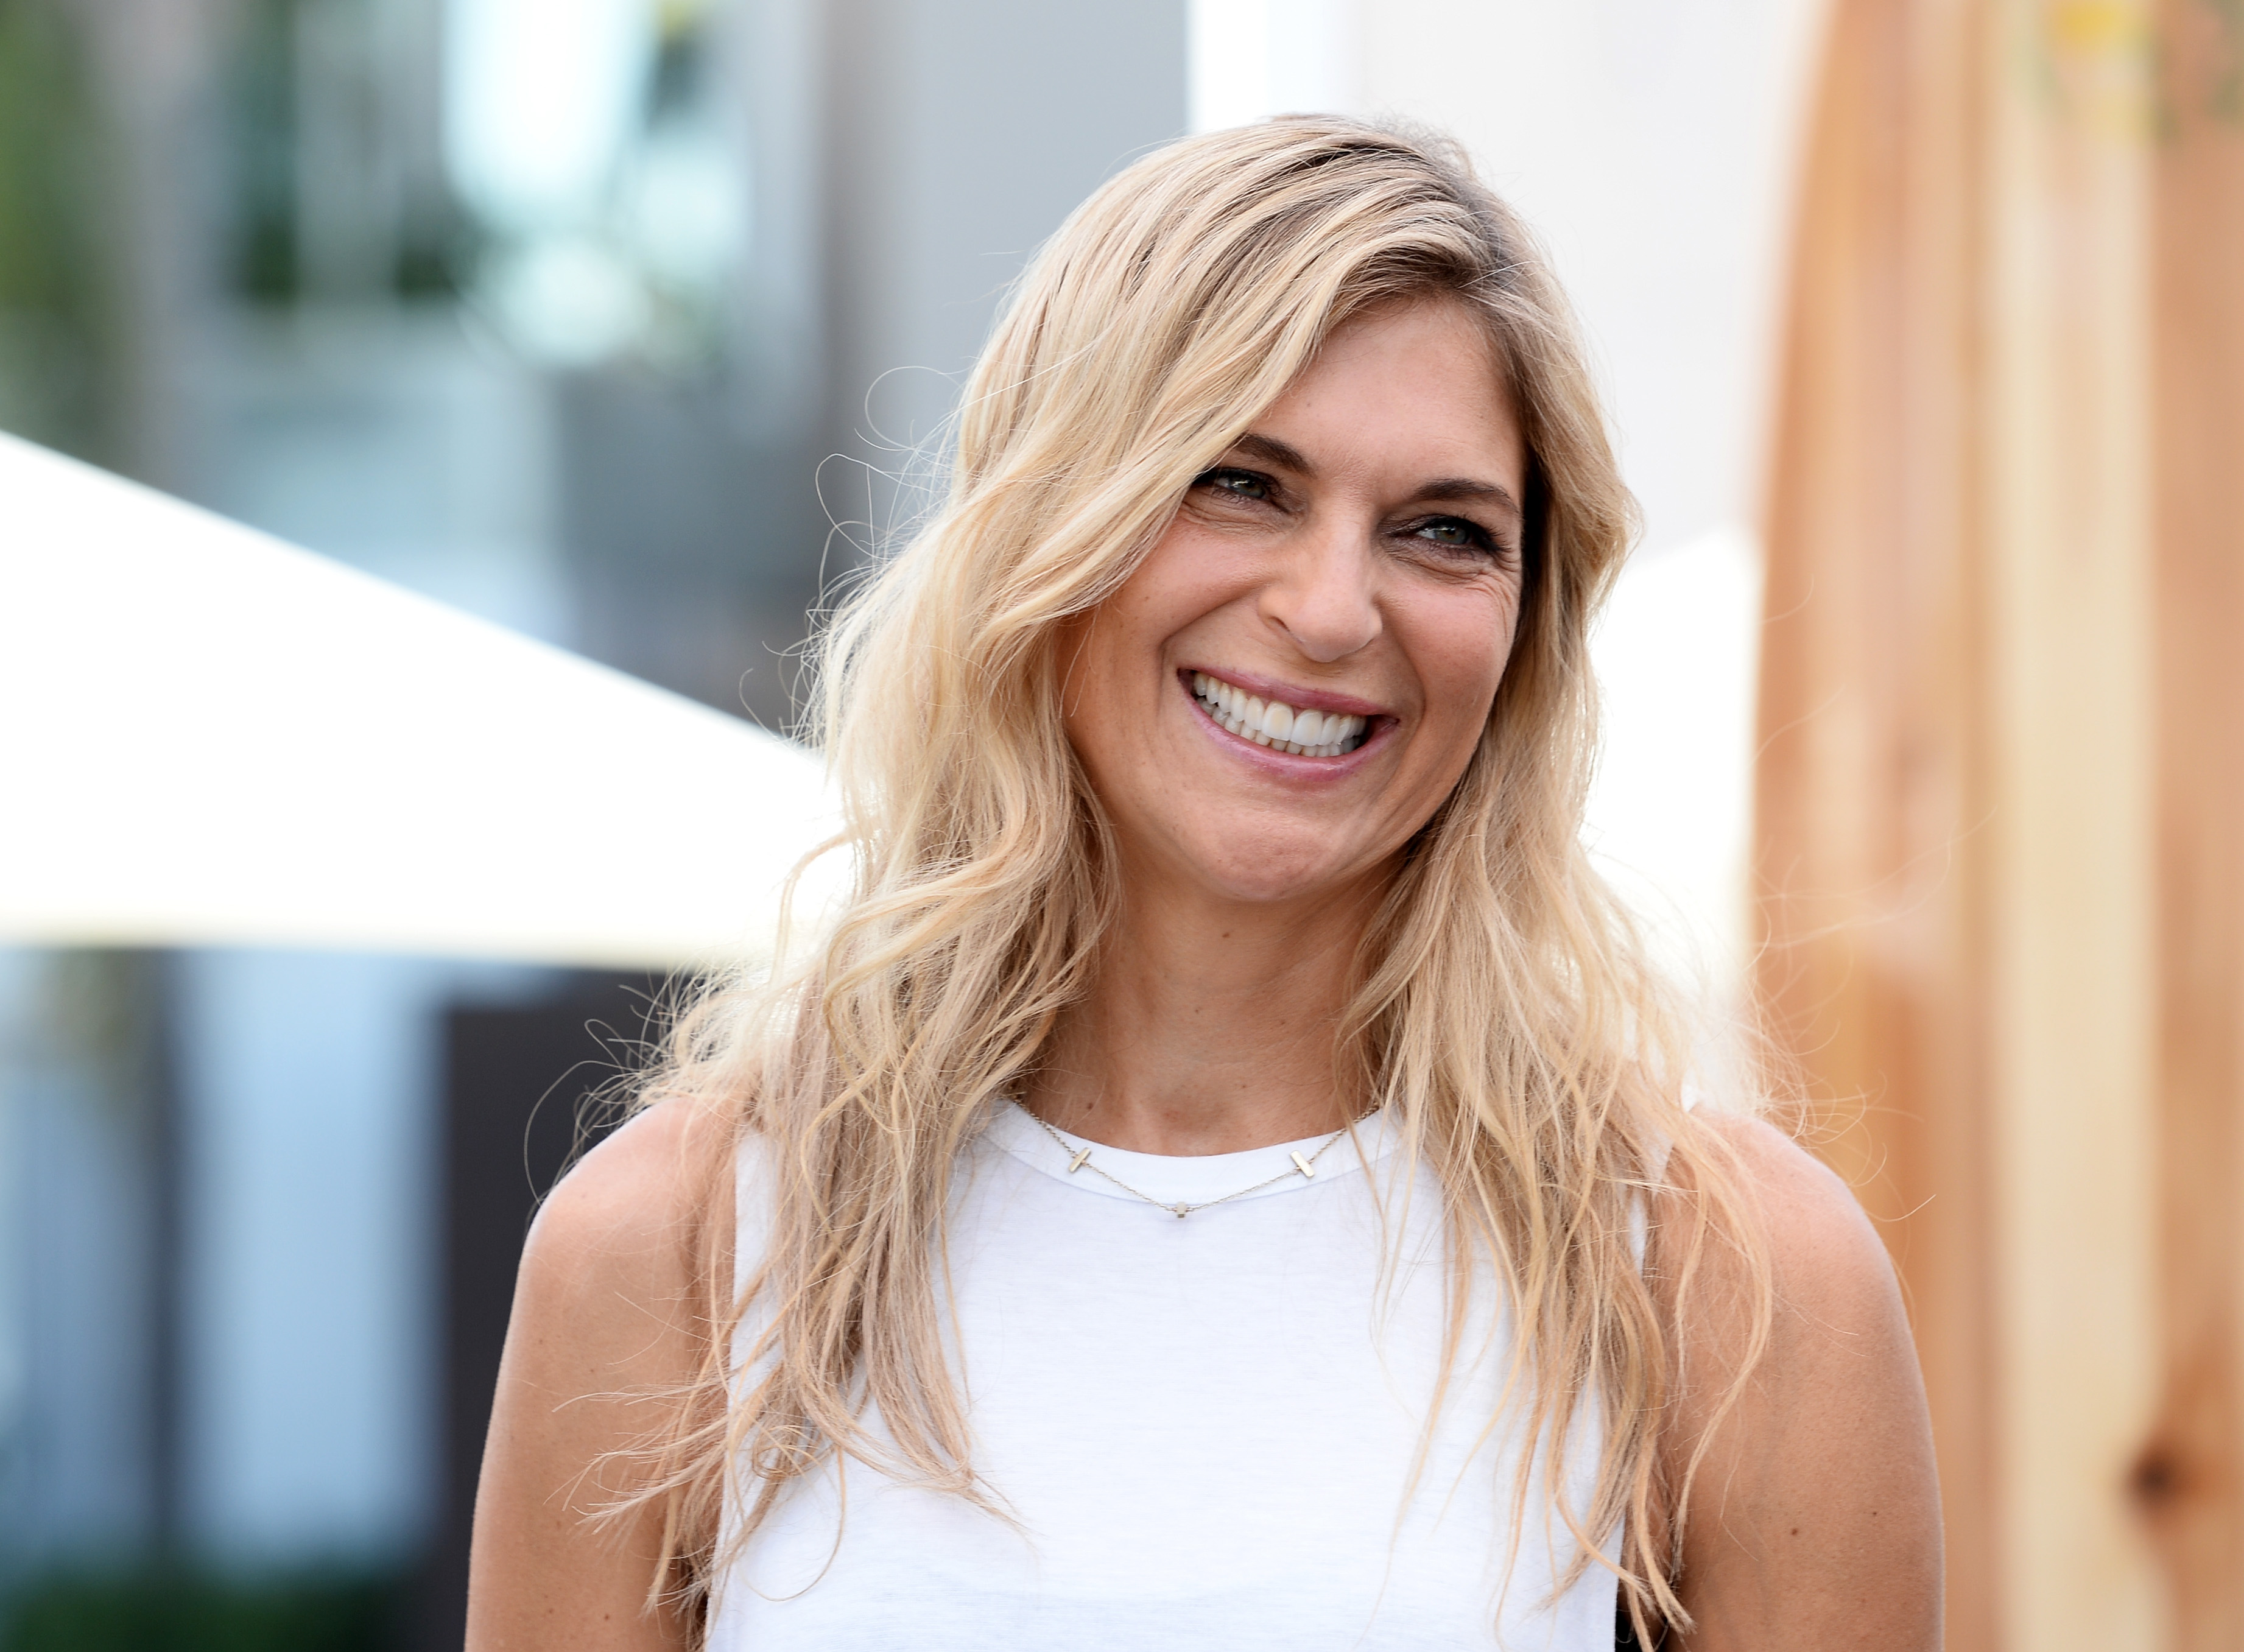 VENICE, CA - NOVEMBER 11:  Volleyball player Gabby Reece joins Land Rover for the North American debut of the all new Discovery SUV on November 11, 2016 in Venice, California.  (Photo by Amanda Edwards/WireImage) (Amanda Edwards—WireImage)